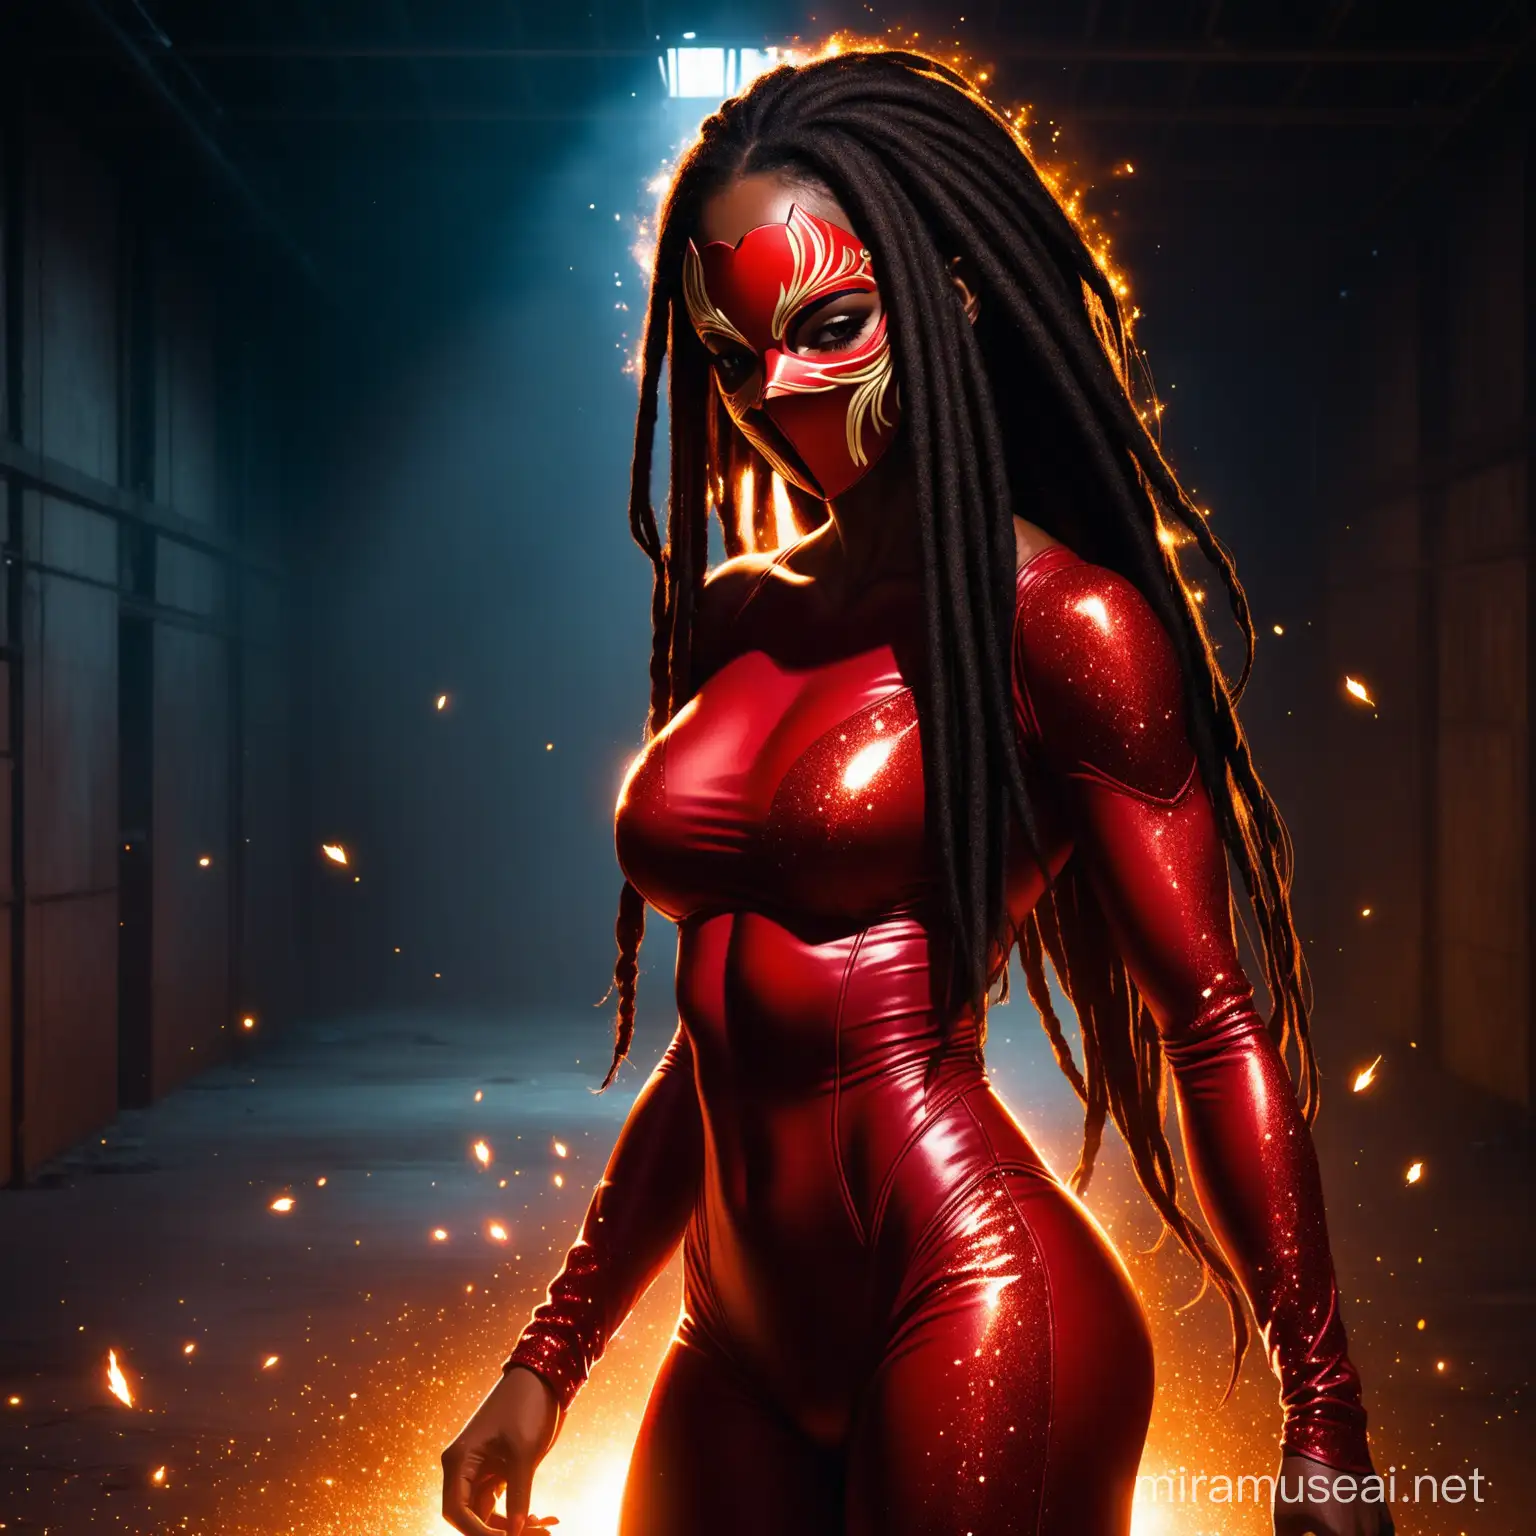 an african american female dressed in a tight red leather suit her body is toned and athletic her hair in long dred locks stands in an abandoned warehouse she slips out from the shadows. One side of her face is covered with a glowing red mask. The mask is covered in glitter and shimmers in the darkness like tiny embers of fire